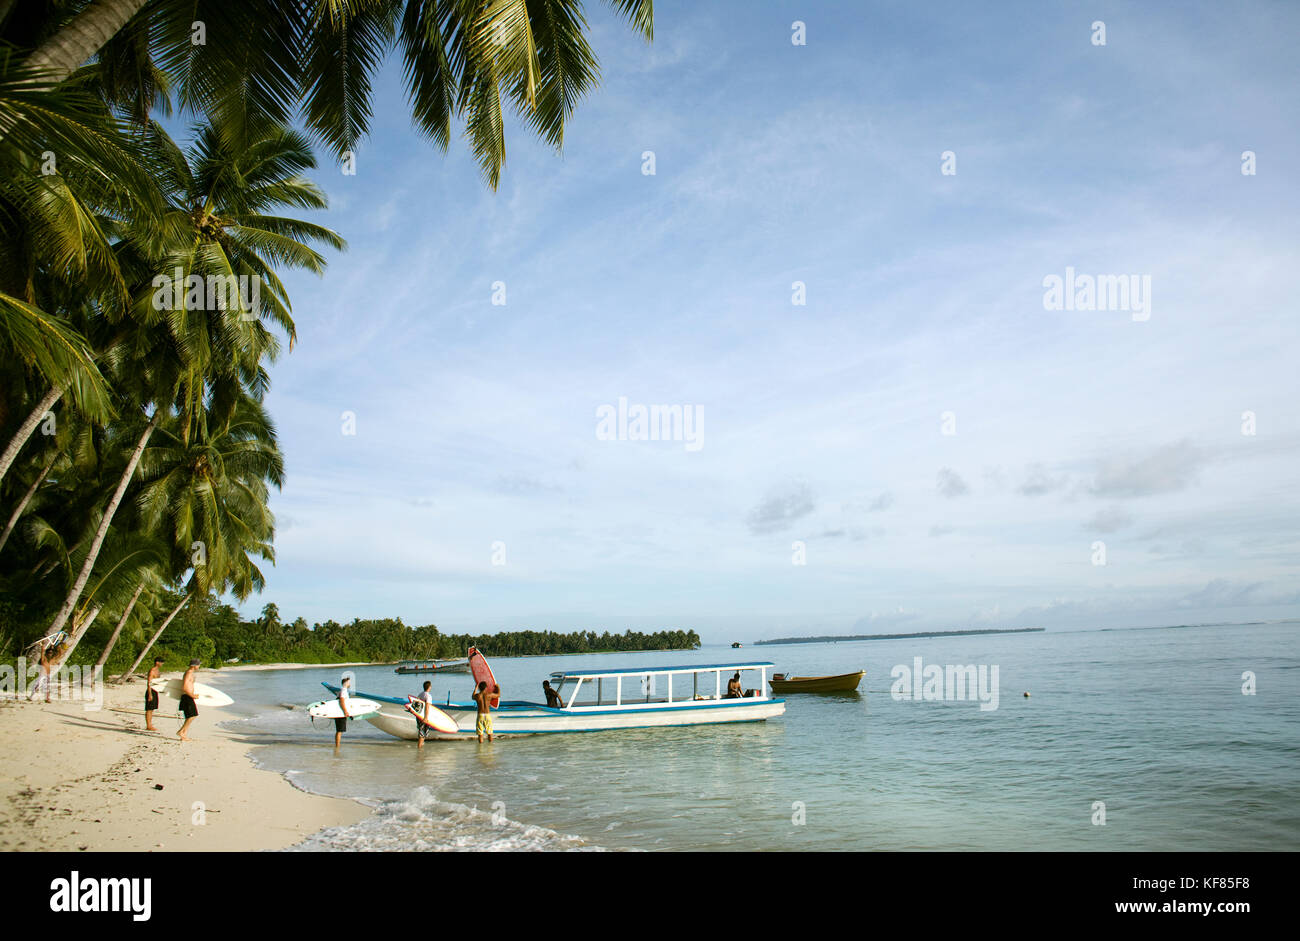 INDONESIA, Mentawai Islands, Kandui Surf Resort, surfers loading a boat to go surfing Stock Photo